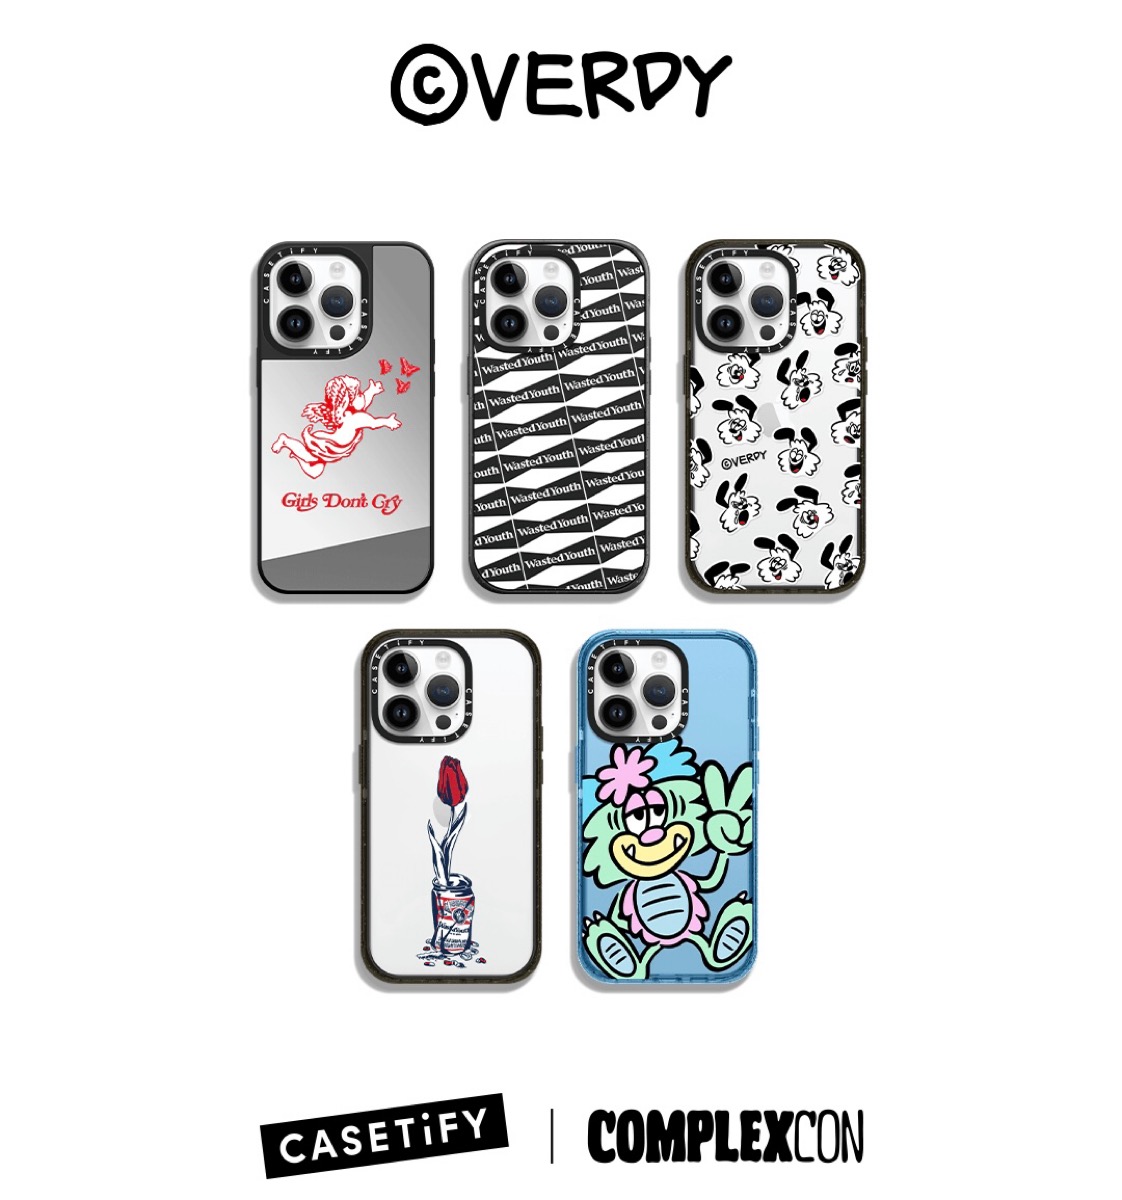 VERDY Girls Don't Cry & Wasted Youth × CASETiFY コラボコレクション ...